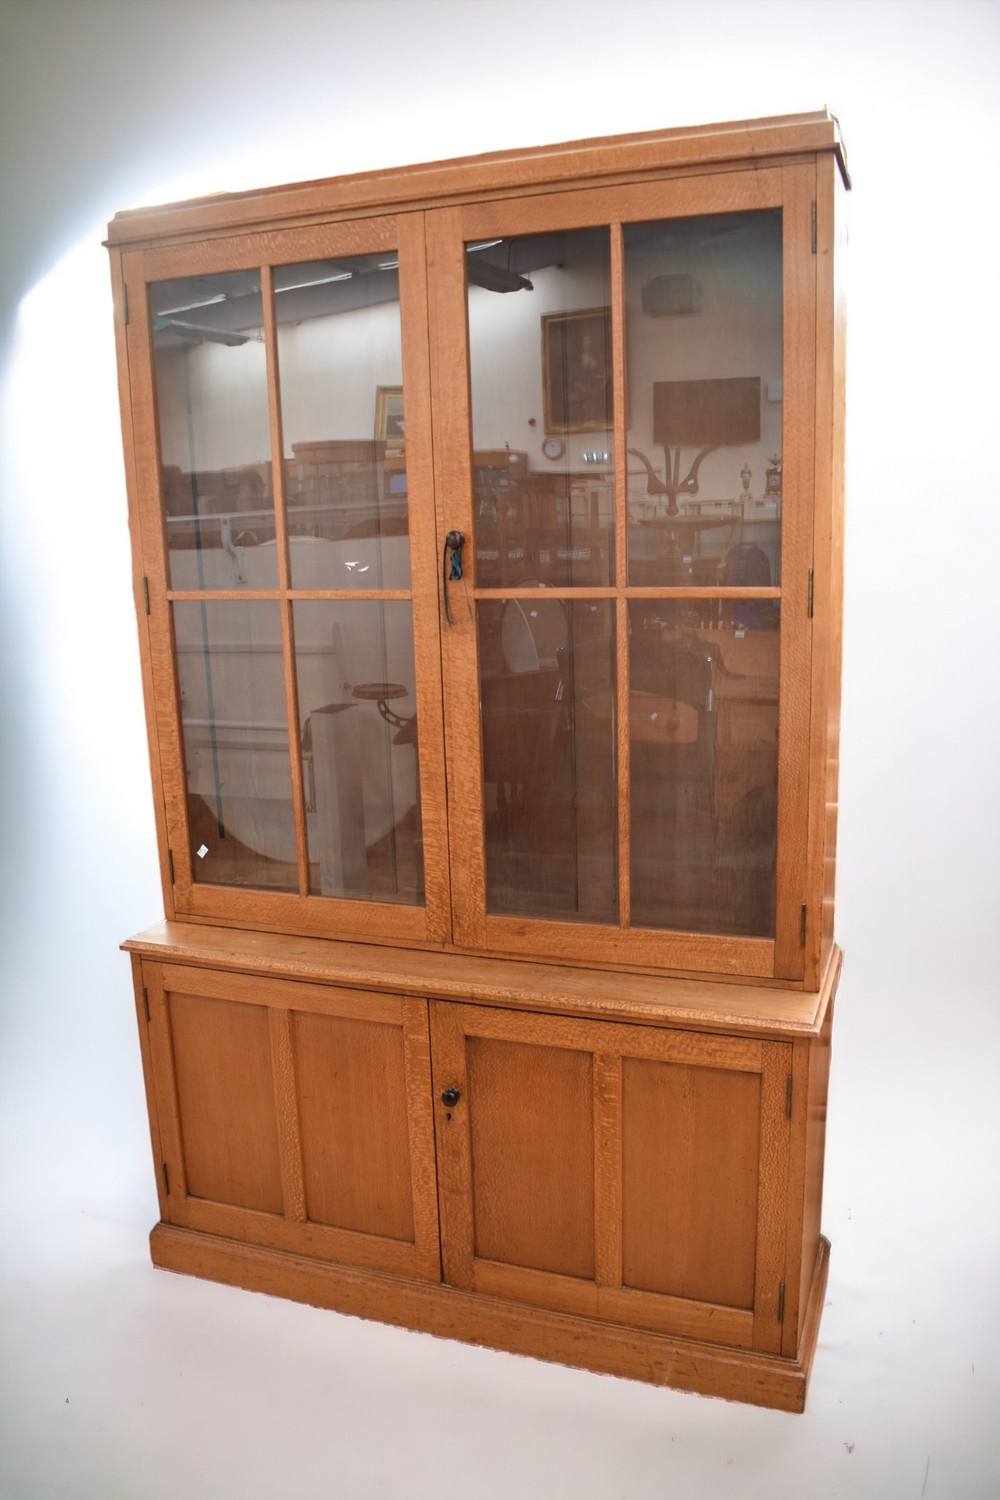 A mid-20th century glazed display cabinet in mahogany and pine, 140 x 210 x 40cm